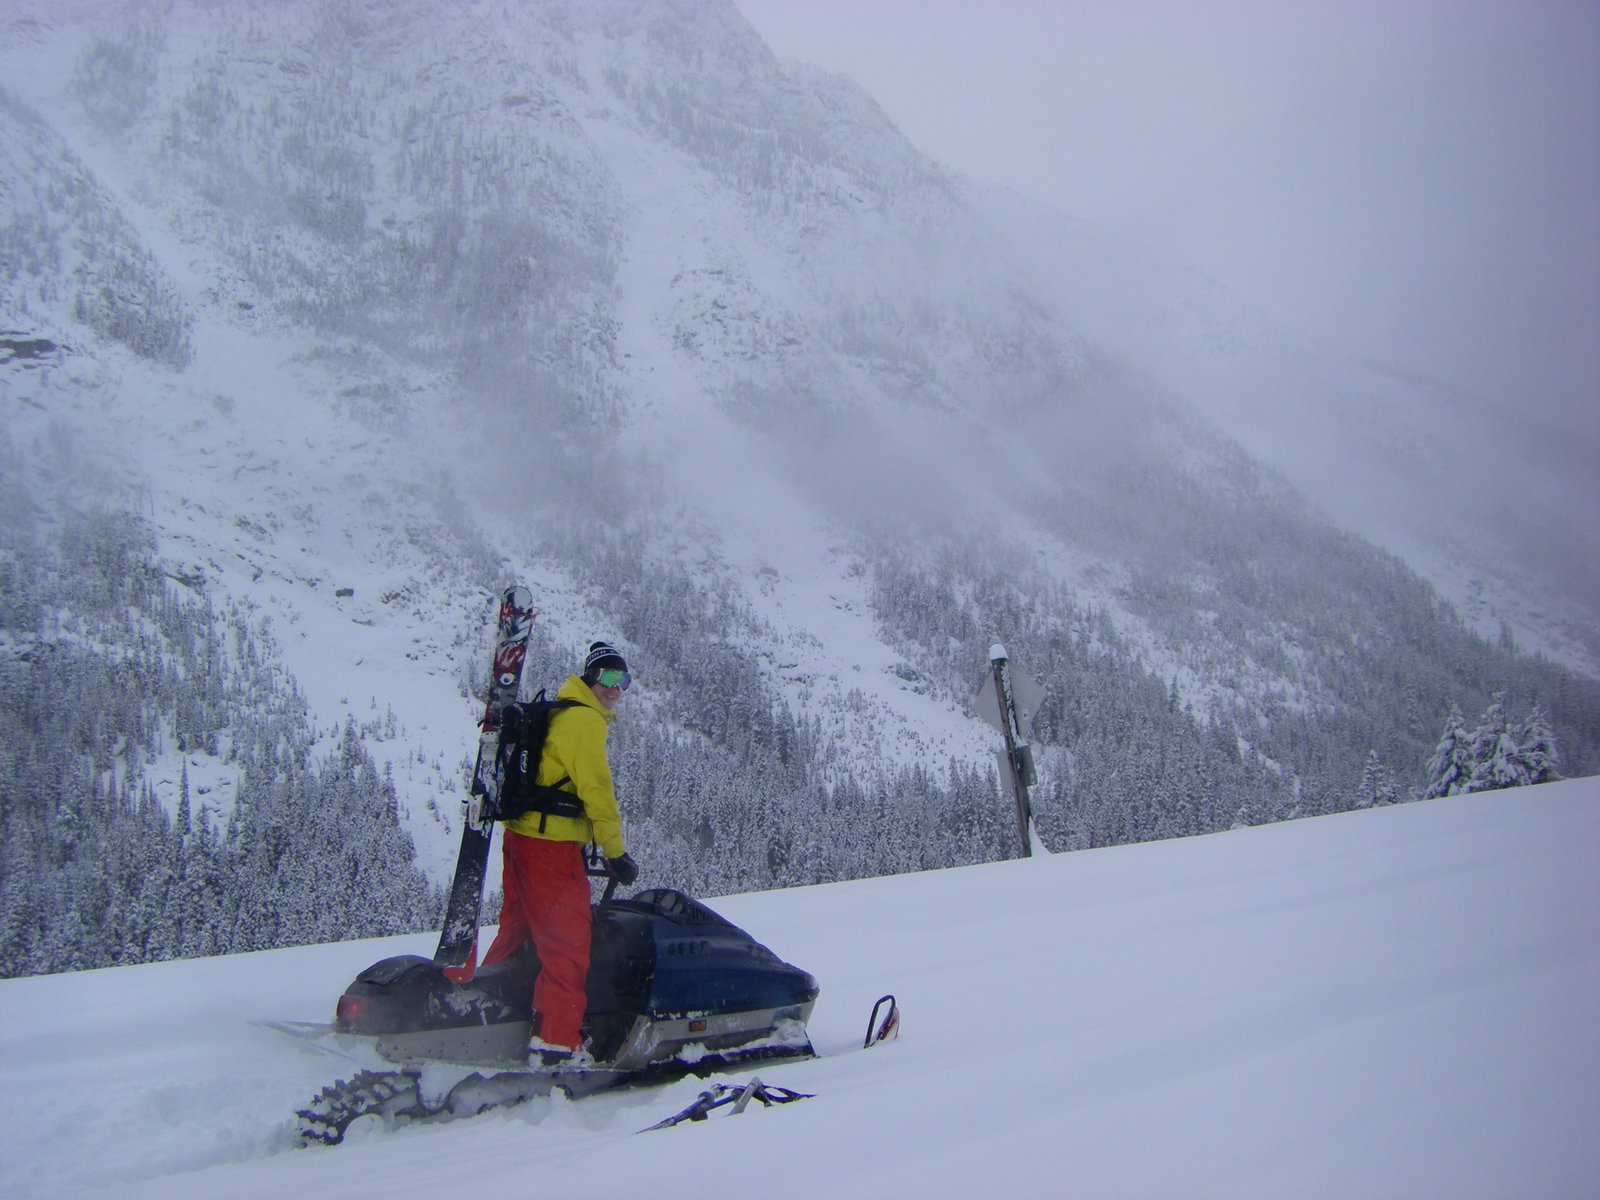 North cascades 'mobile skiing